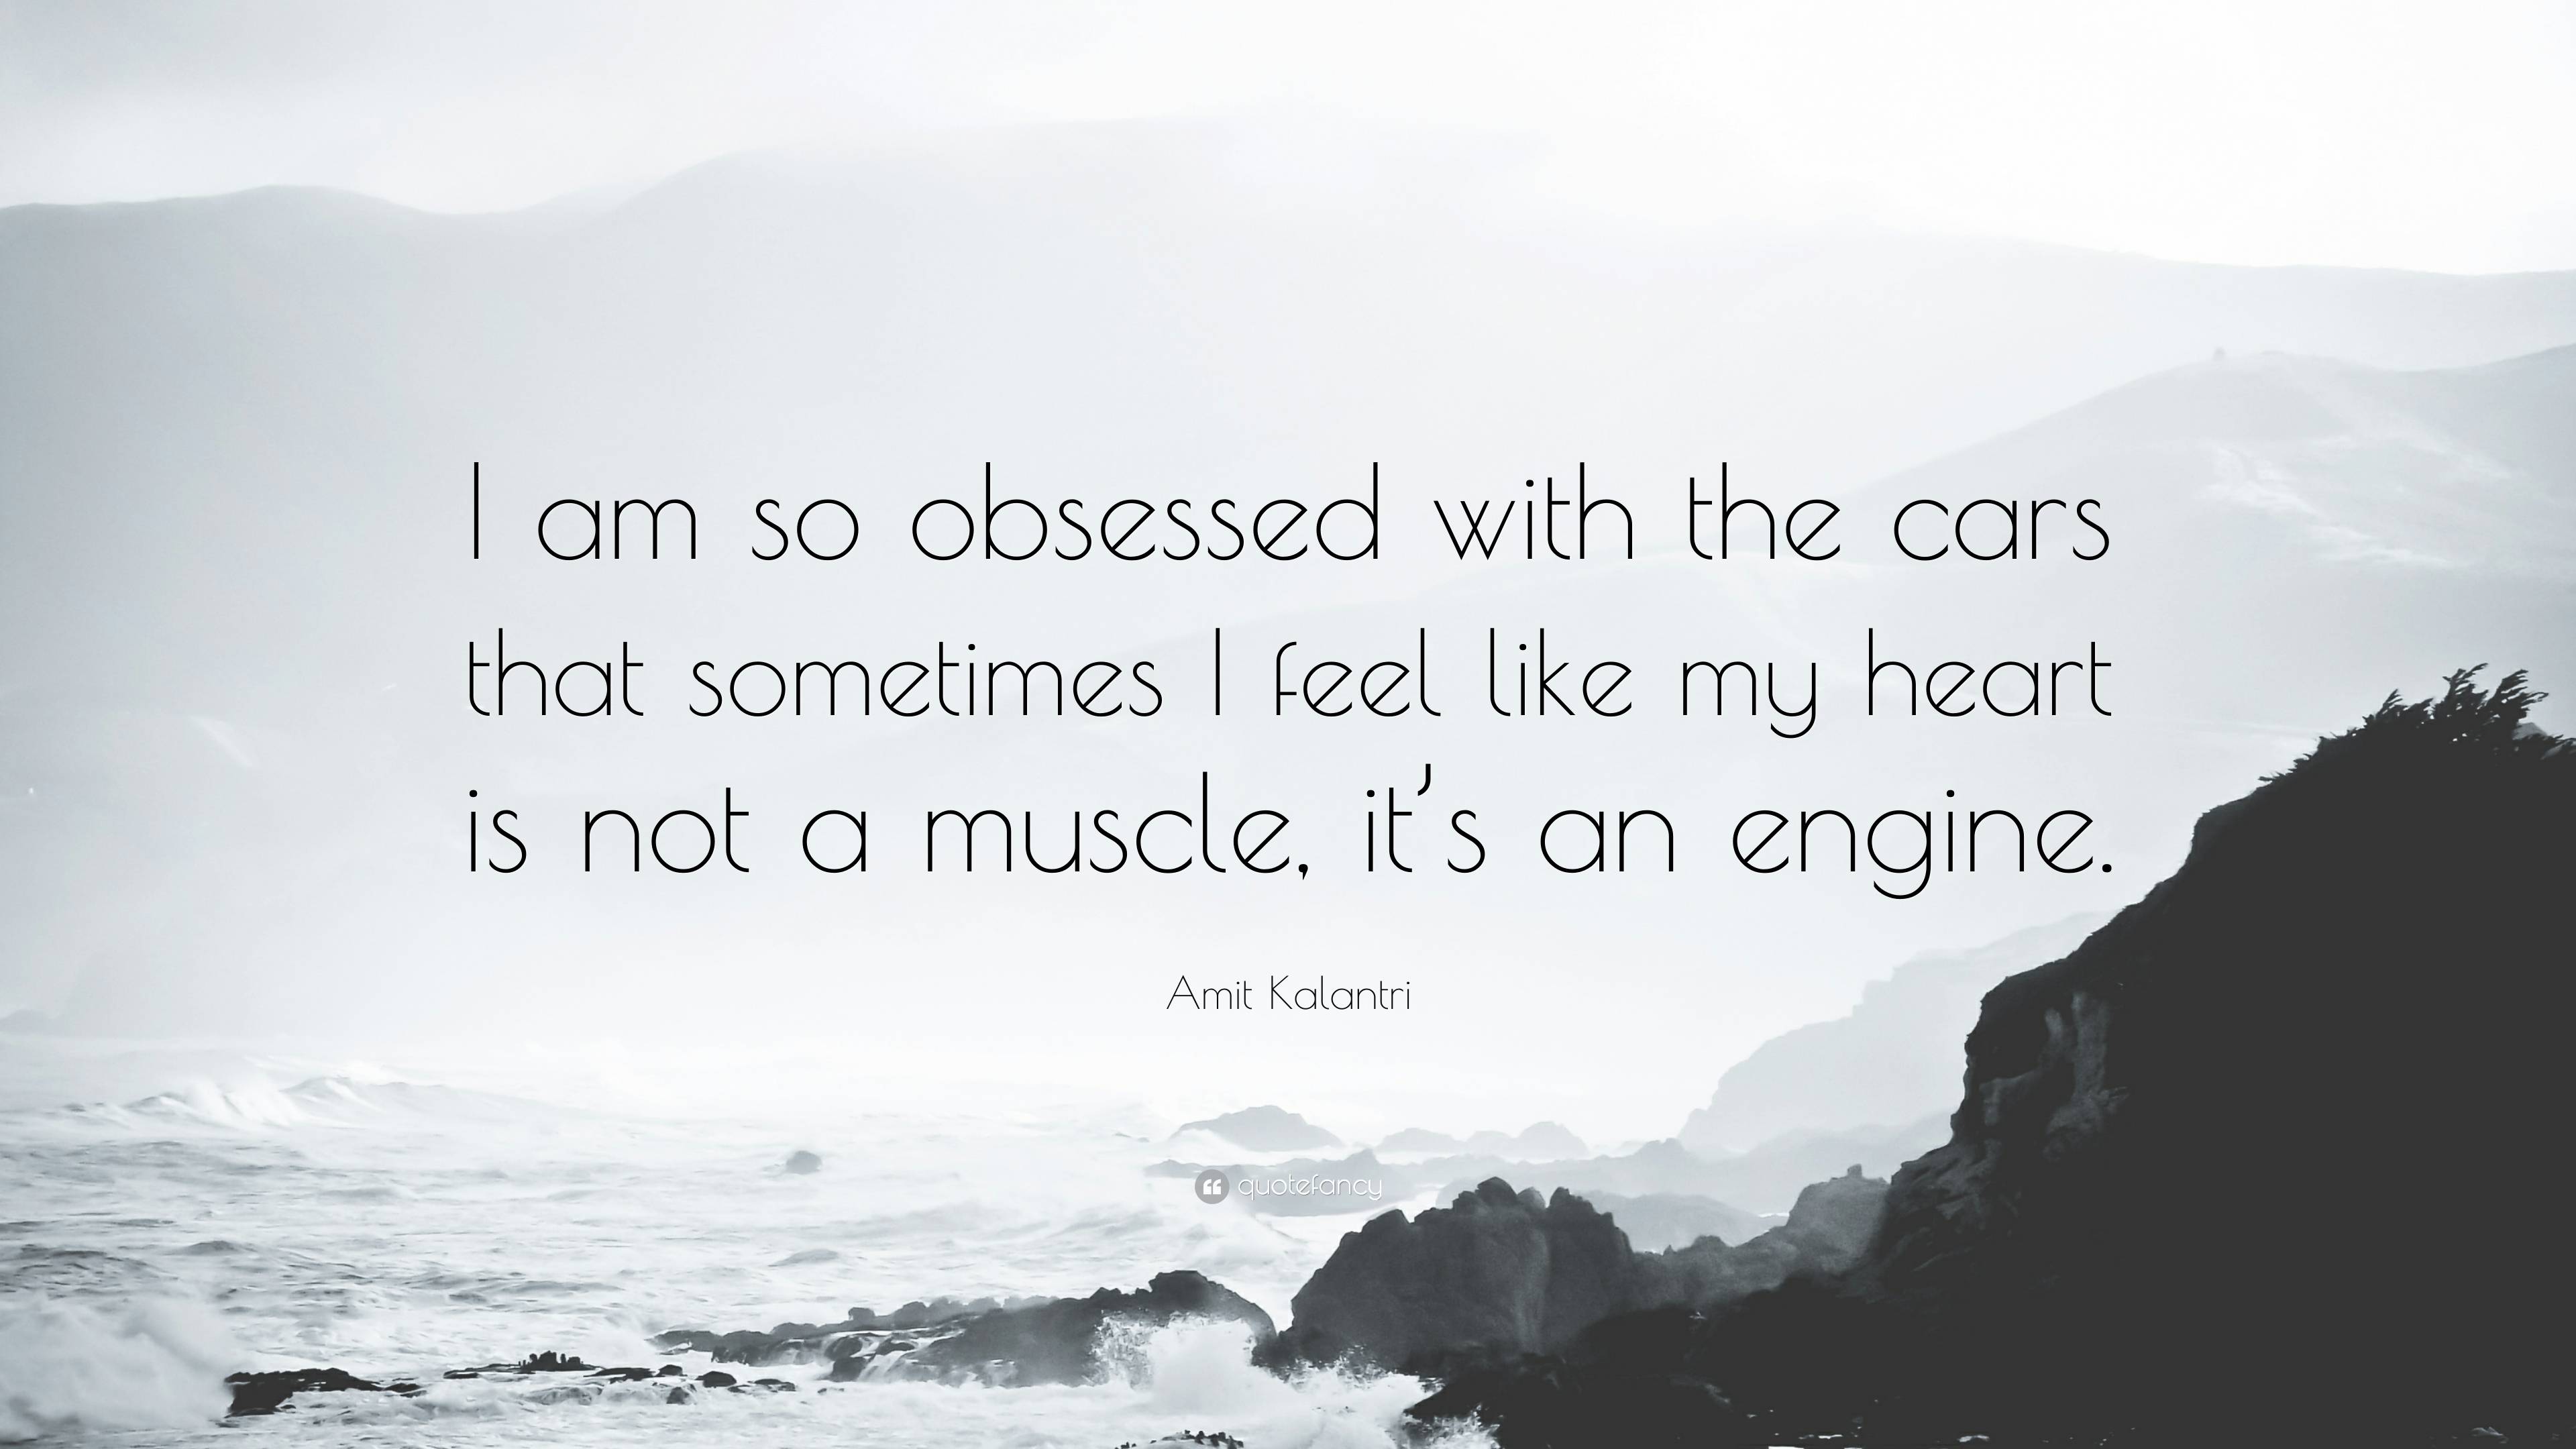 Amit Kalantri Quote: “I am so obsessed with the cars that